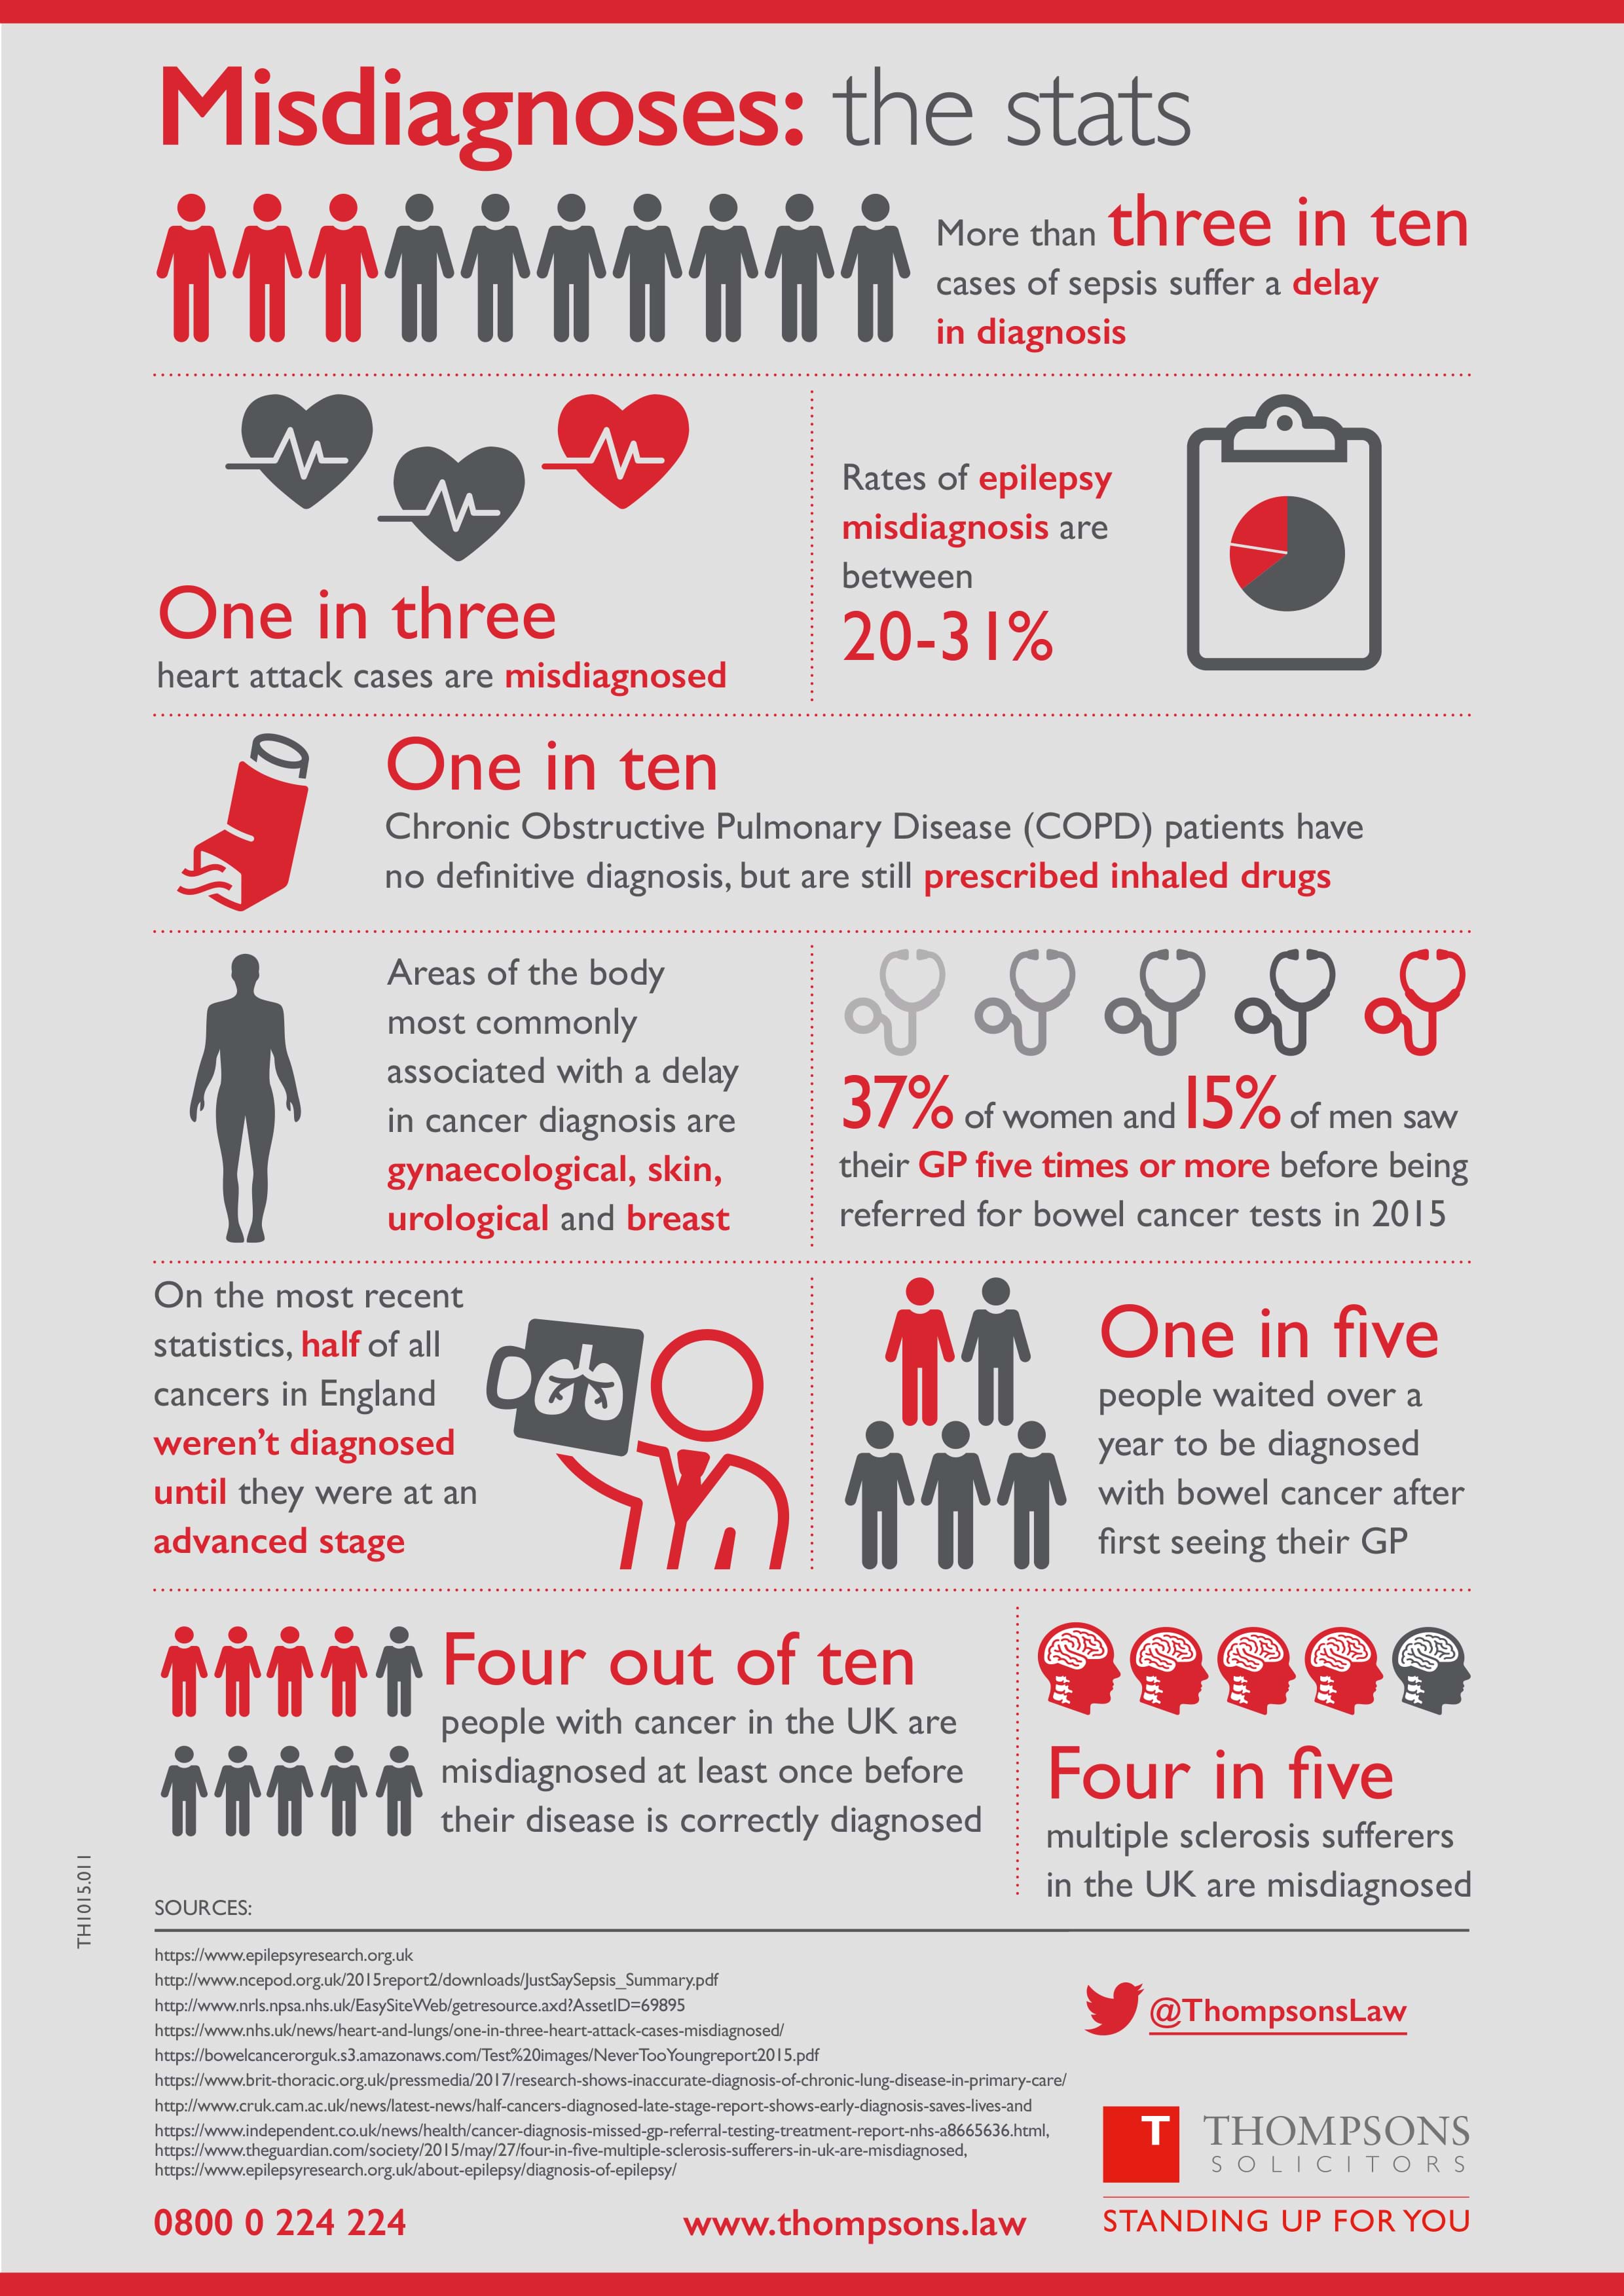 Read our misdiagnosis statistics infographic, which provides an outline of the key facts and figures regarding how differing individuals have been affected.